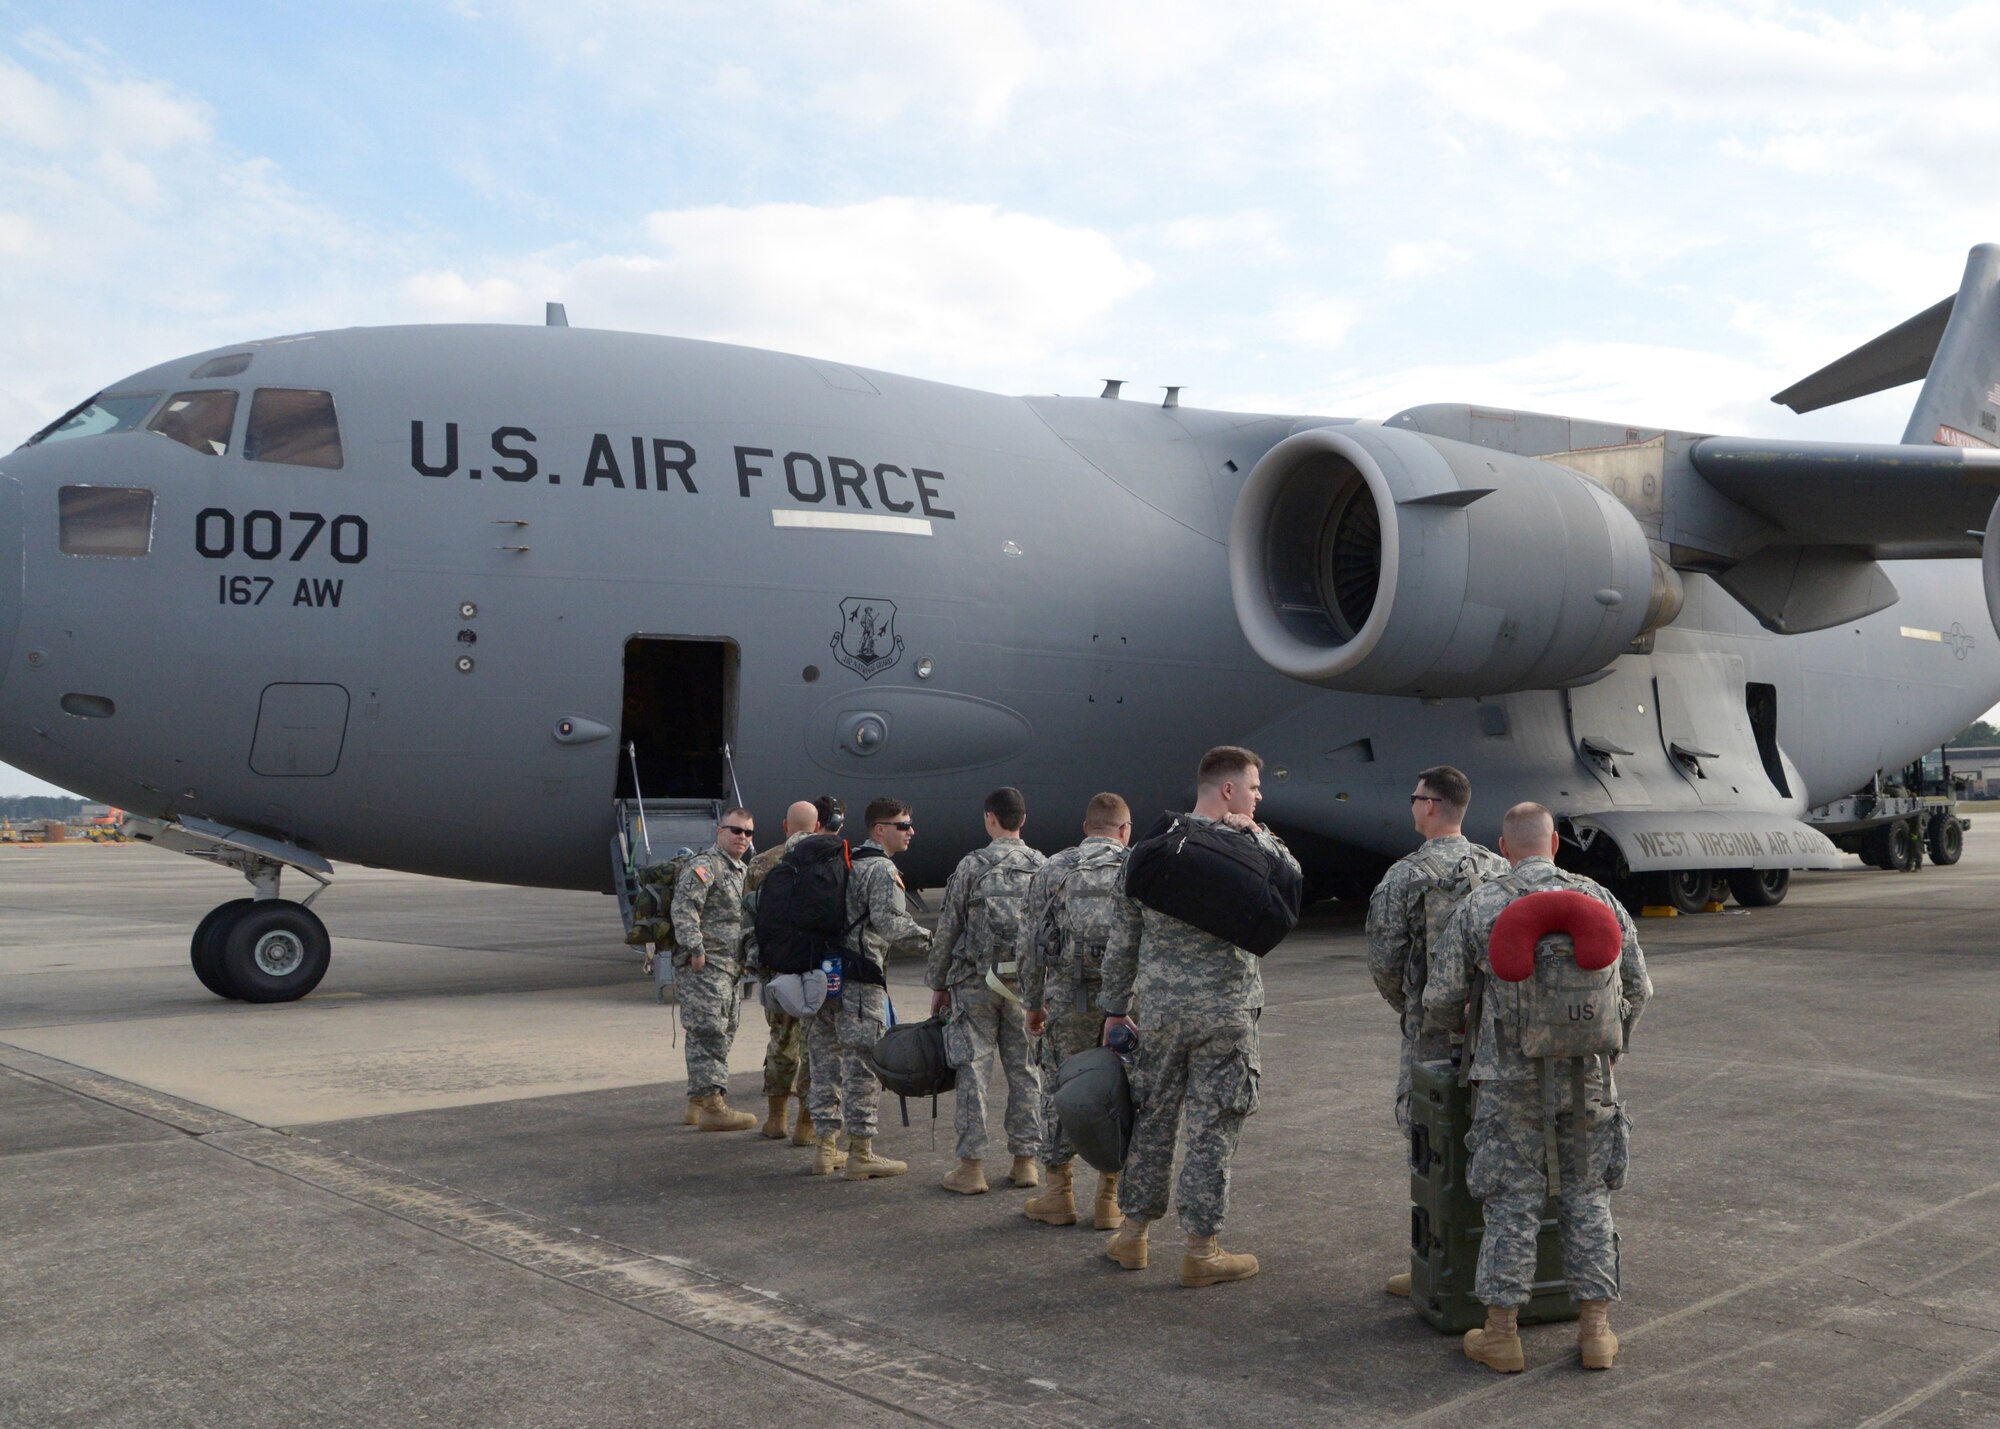 National Guard Soldiers assigned to North Carolina, South Carolina and West Virginia prepare to board a West Virginia Air National Guard C-17 Globemaster III inbound for Moldova at Pope Airfield, N.C., March 5, 2016. The Soldiers will be participating in an overseas deployment training exercise with a Moldovan reconnaissance company, which will prepare them to conduct support missions during a rotation at the National Training Center. (U.S. Army National Guard Photo by Staff Sgt. Brendan Stephens, 382nd Public Affairs Detachment/Released)